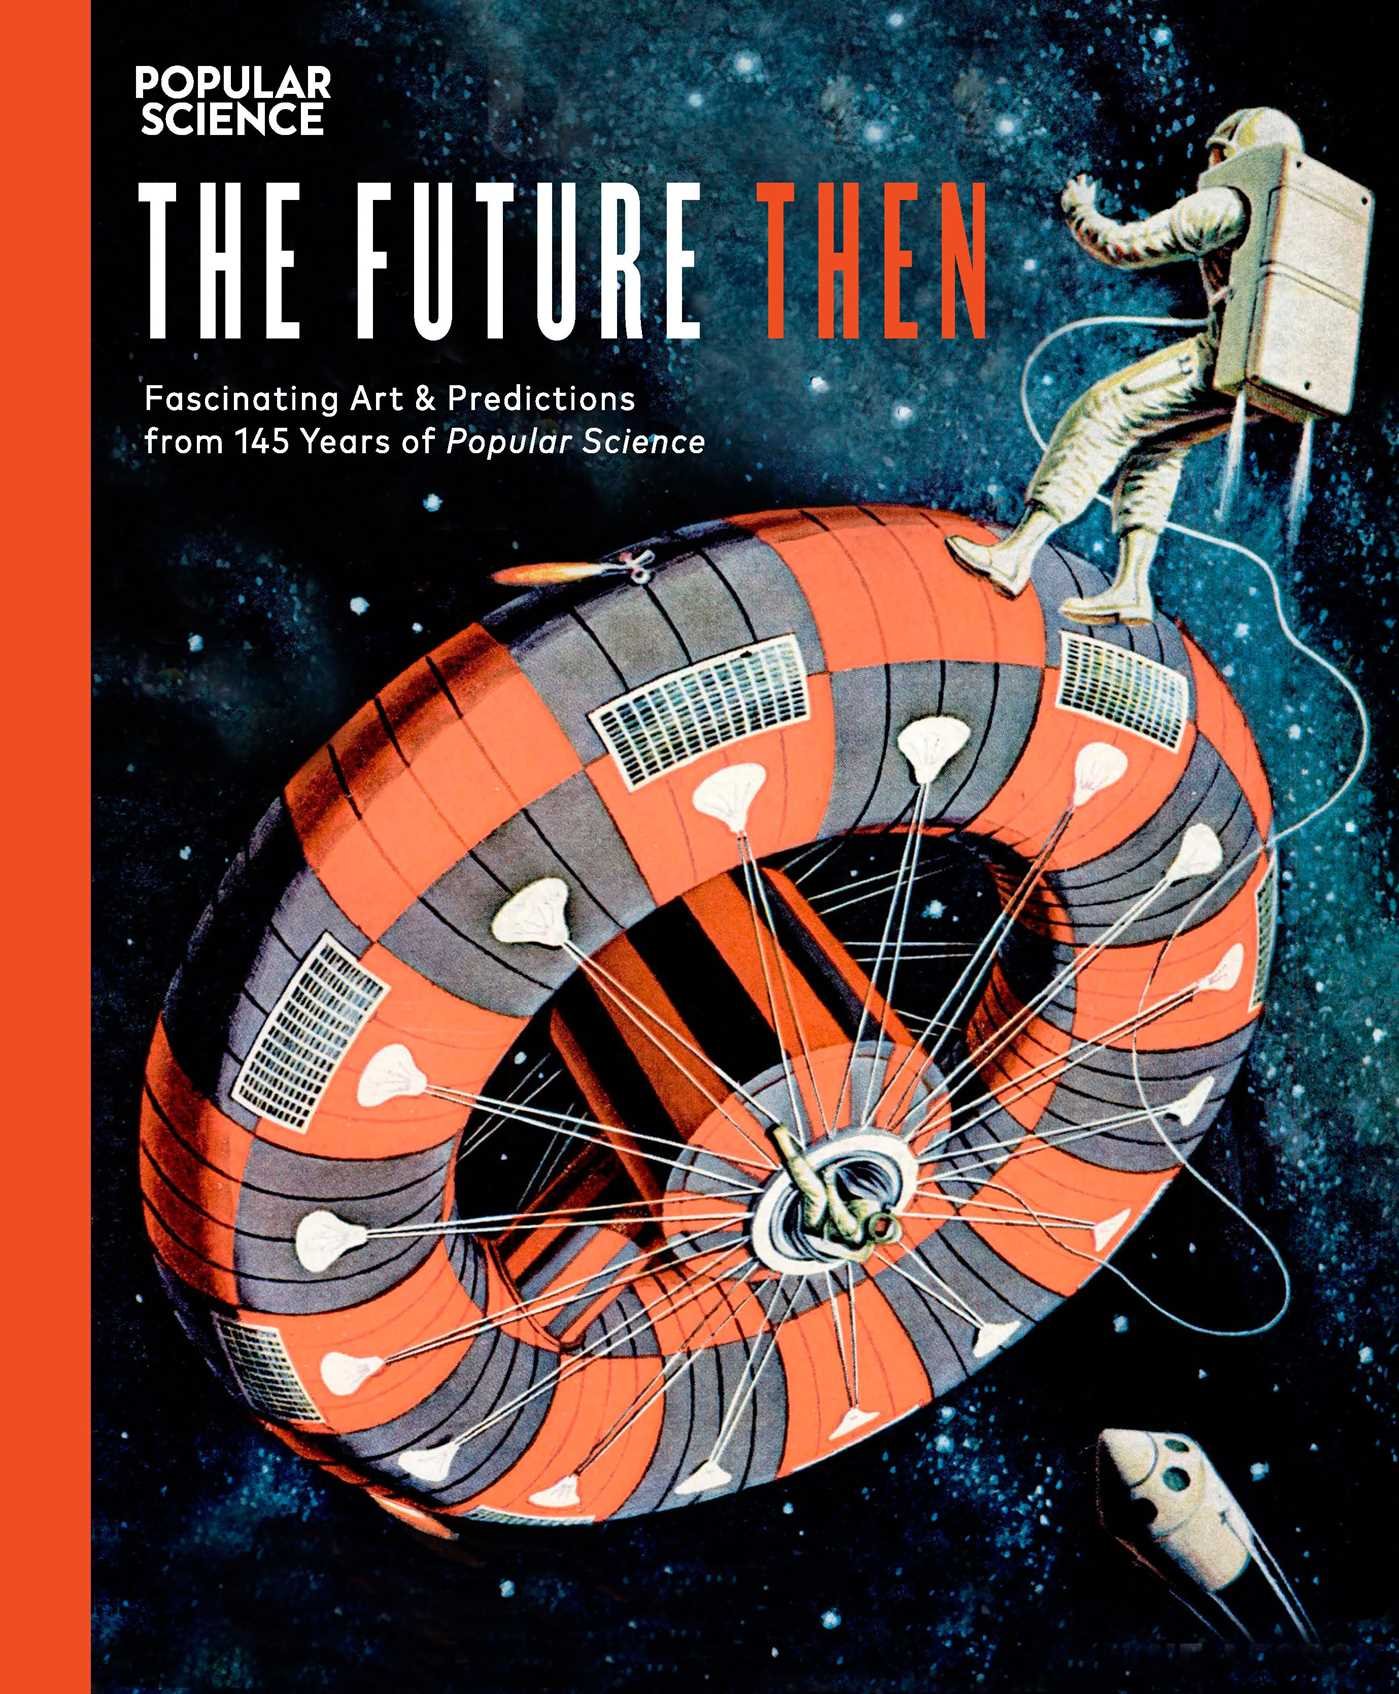 The Future Then: Fascinating Art & Predictions from 145 Years ofPopular Science